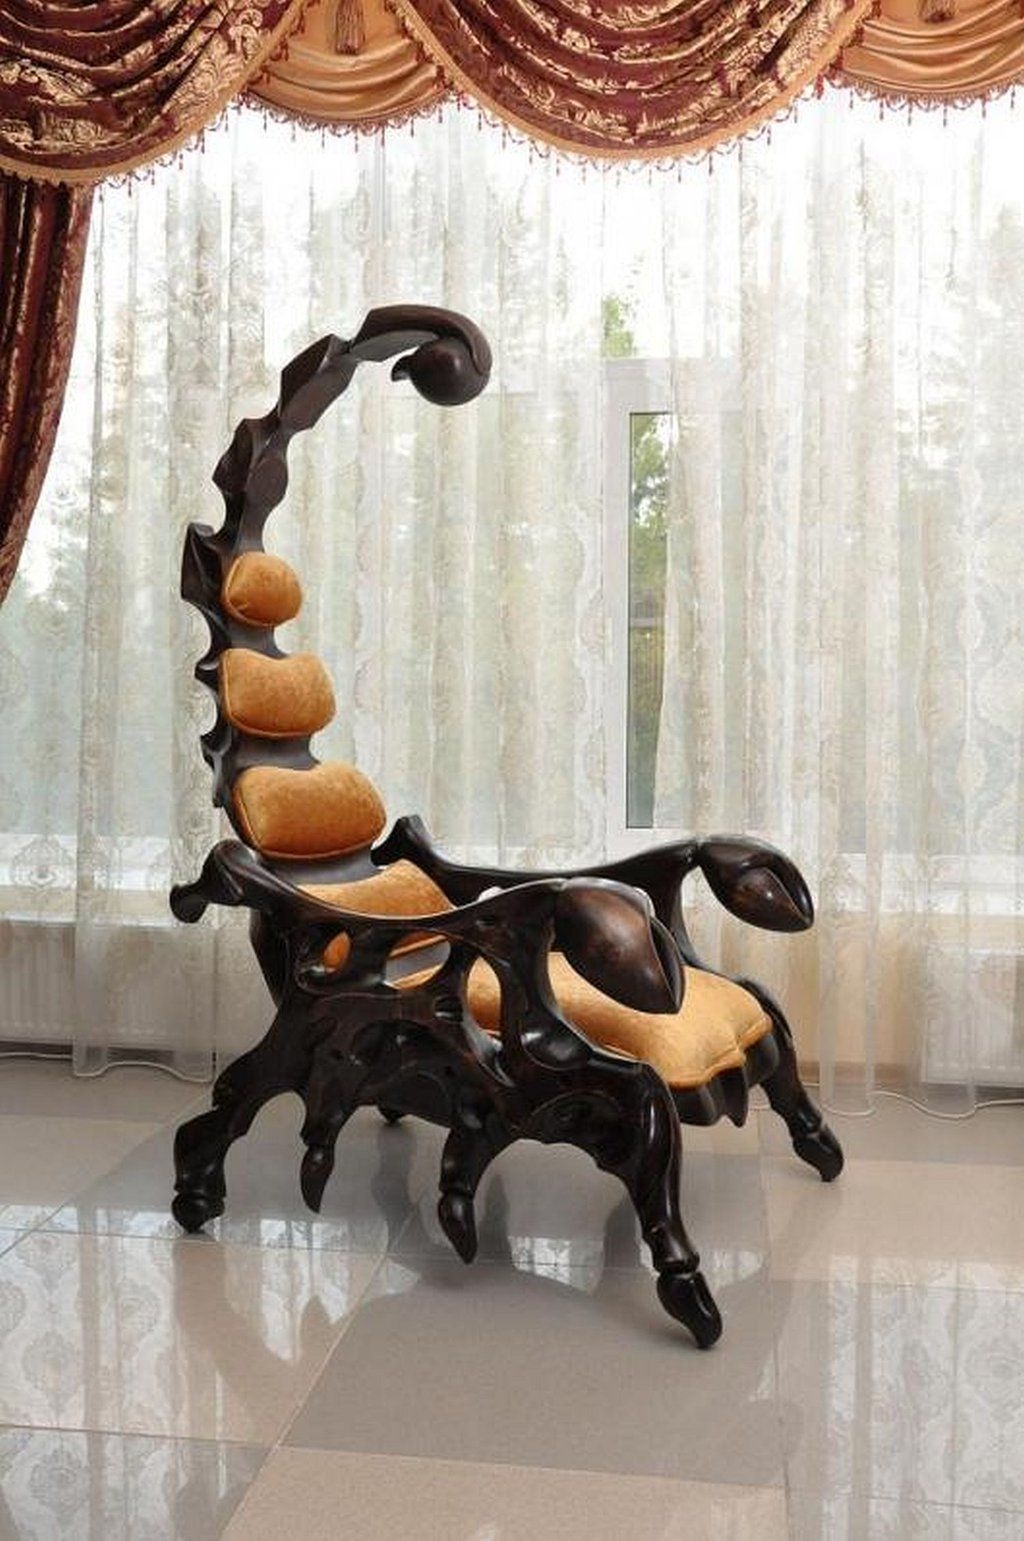 The fearsome scorpion chair is a handcrafted wooden chair that